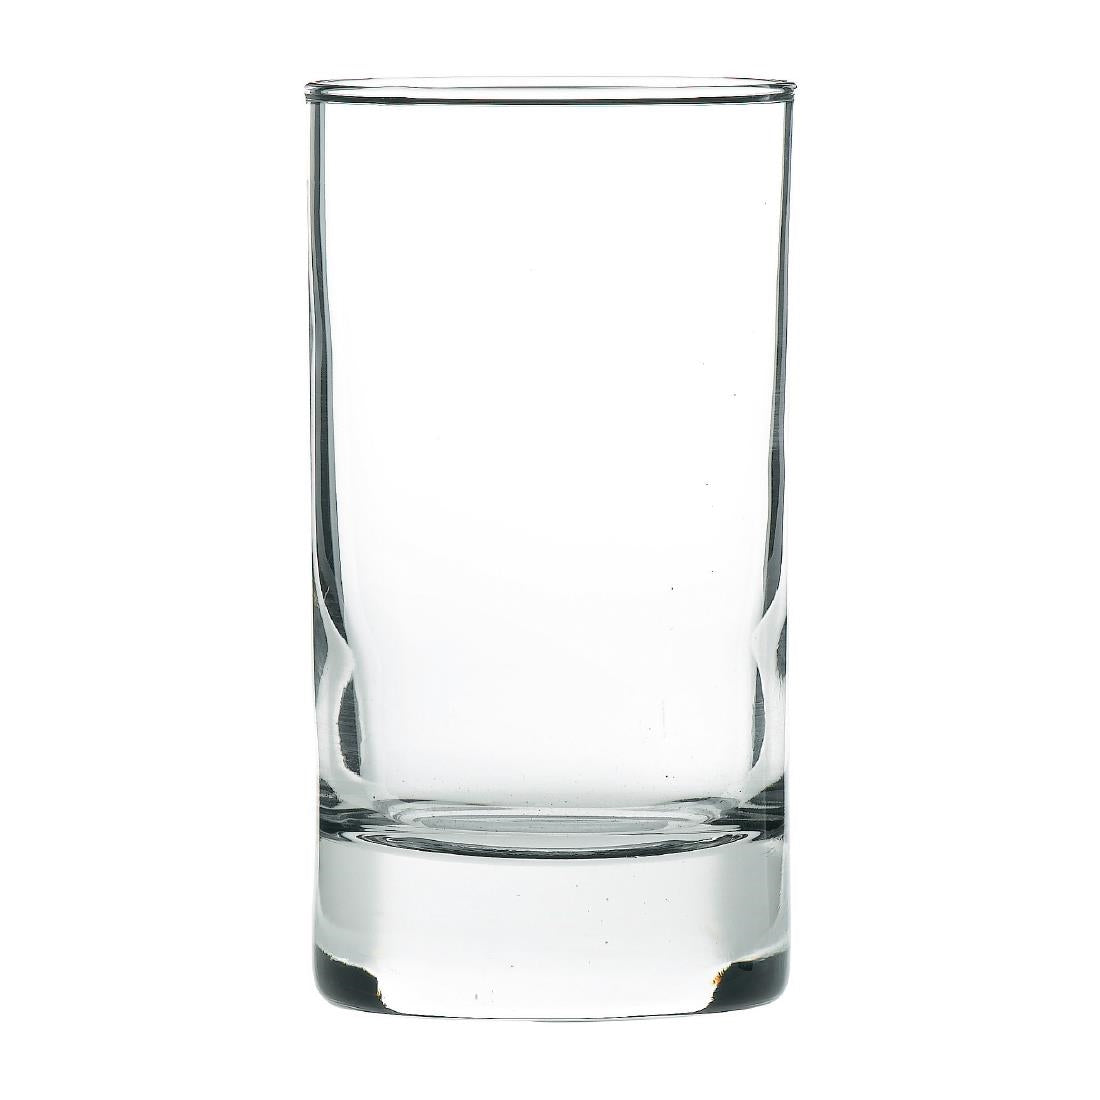 FU401 Onis Chicago Juice Glasses 140ml (Pack of 12)